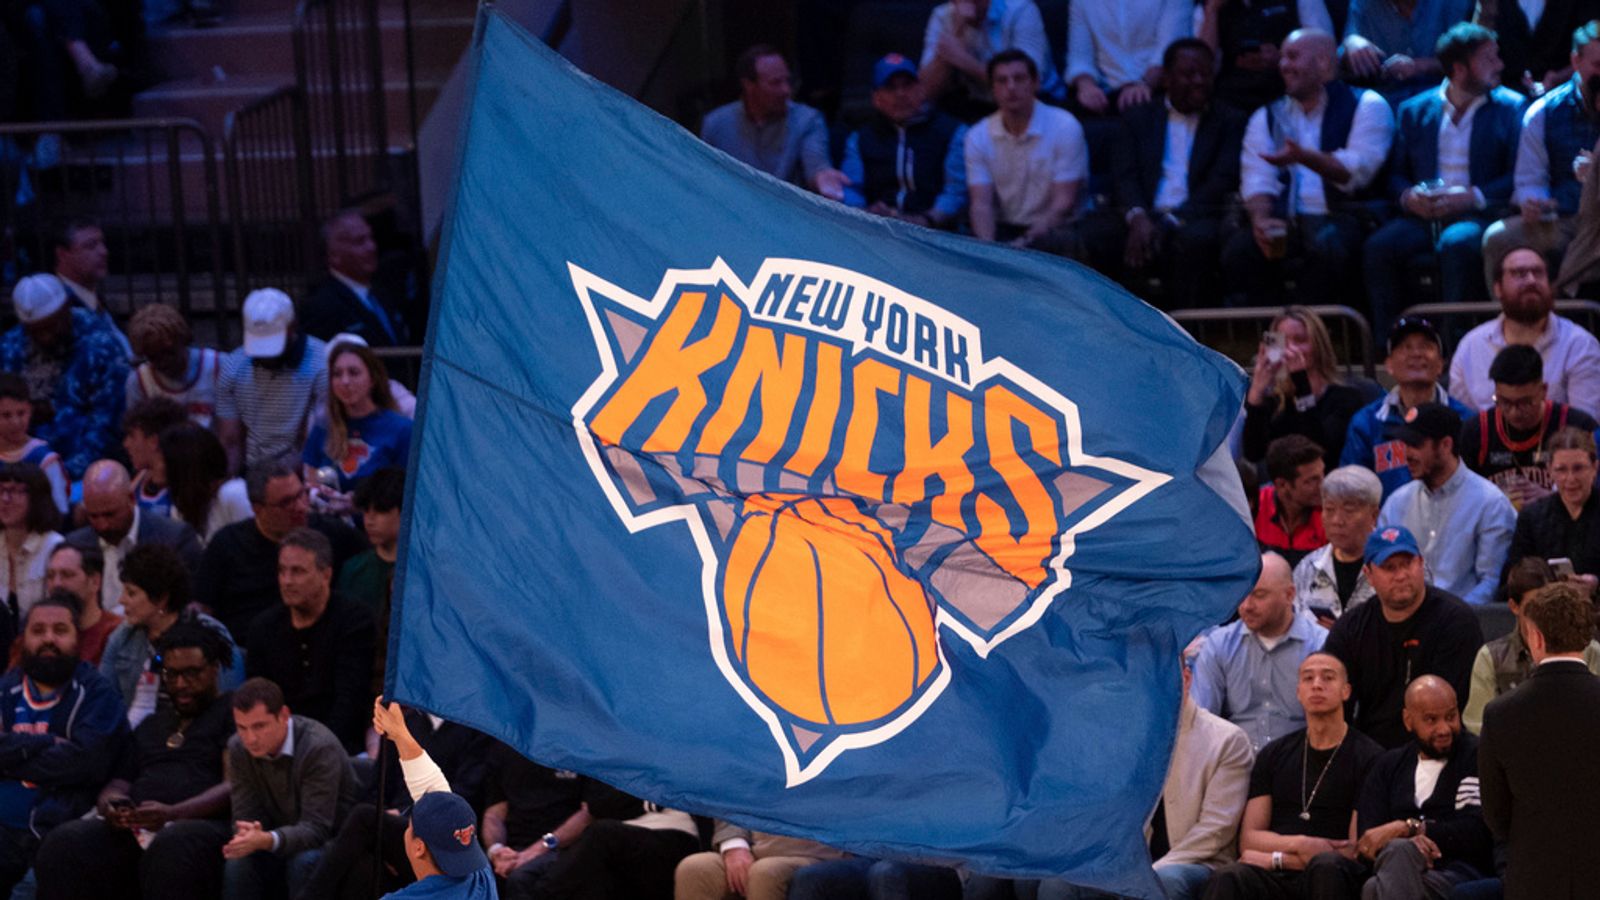 The Knicks are suing their Eastern Conference rivals, the Toronto Raptors